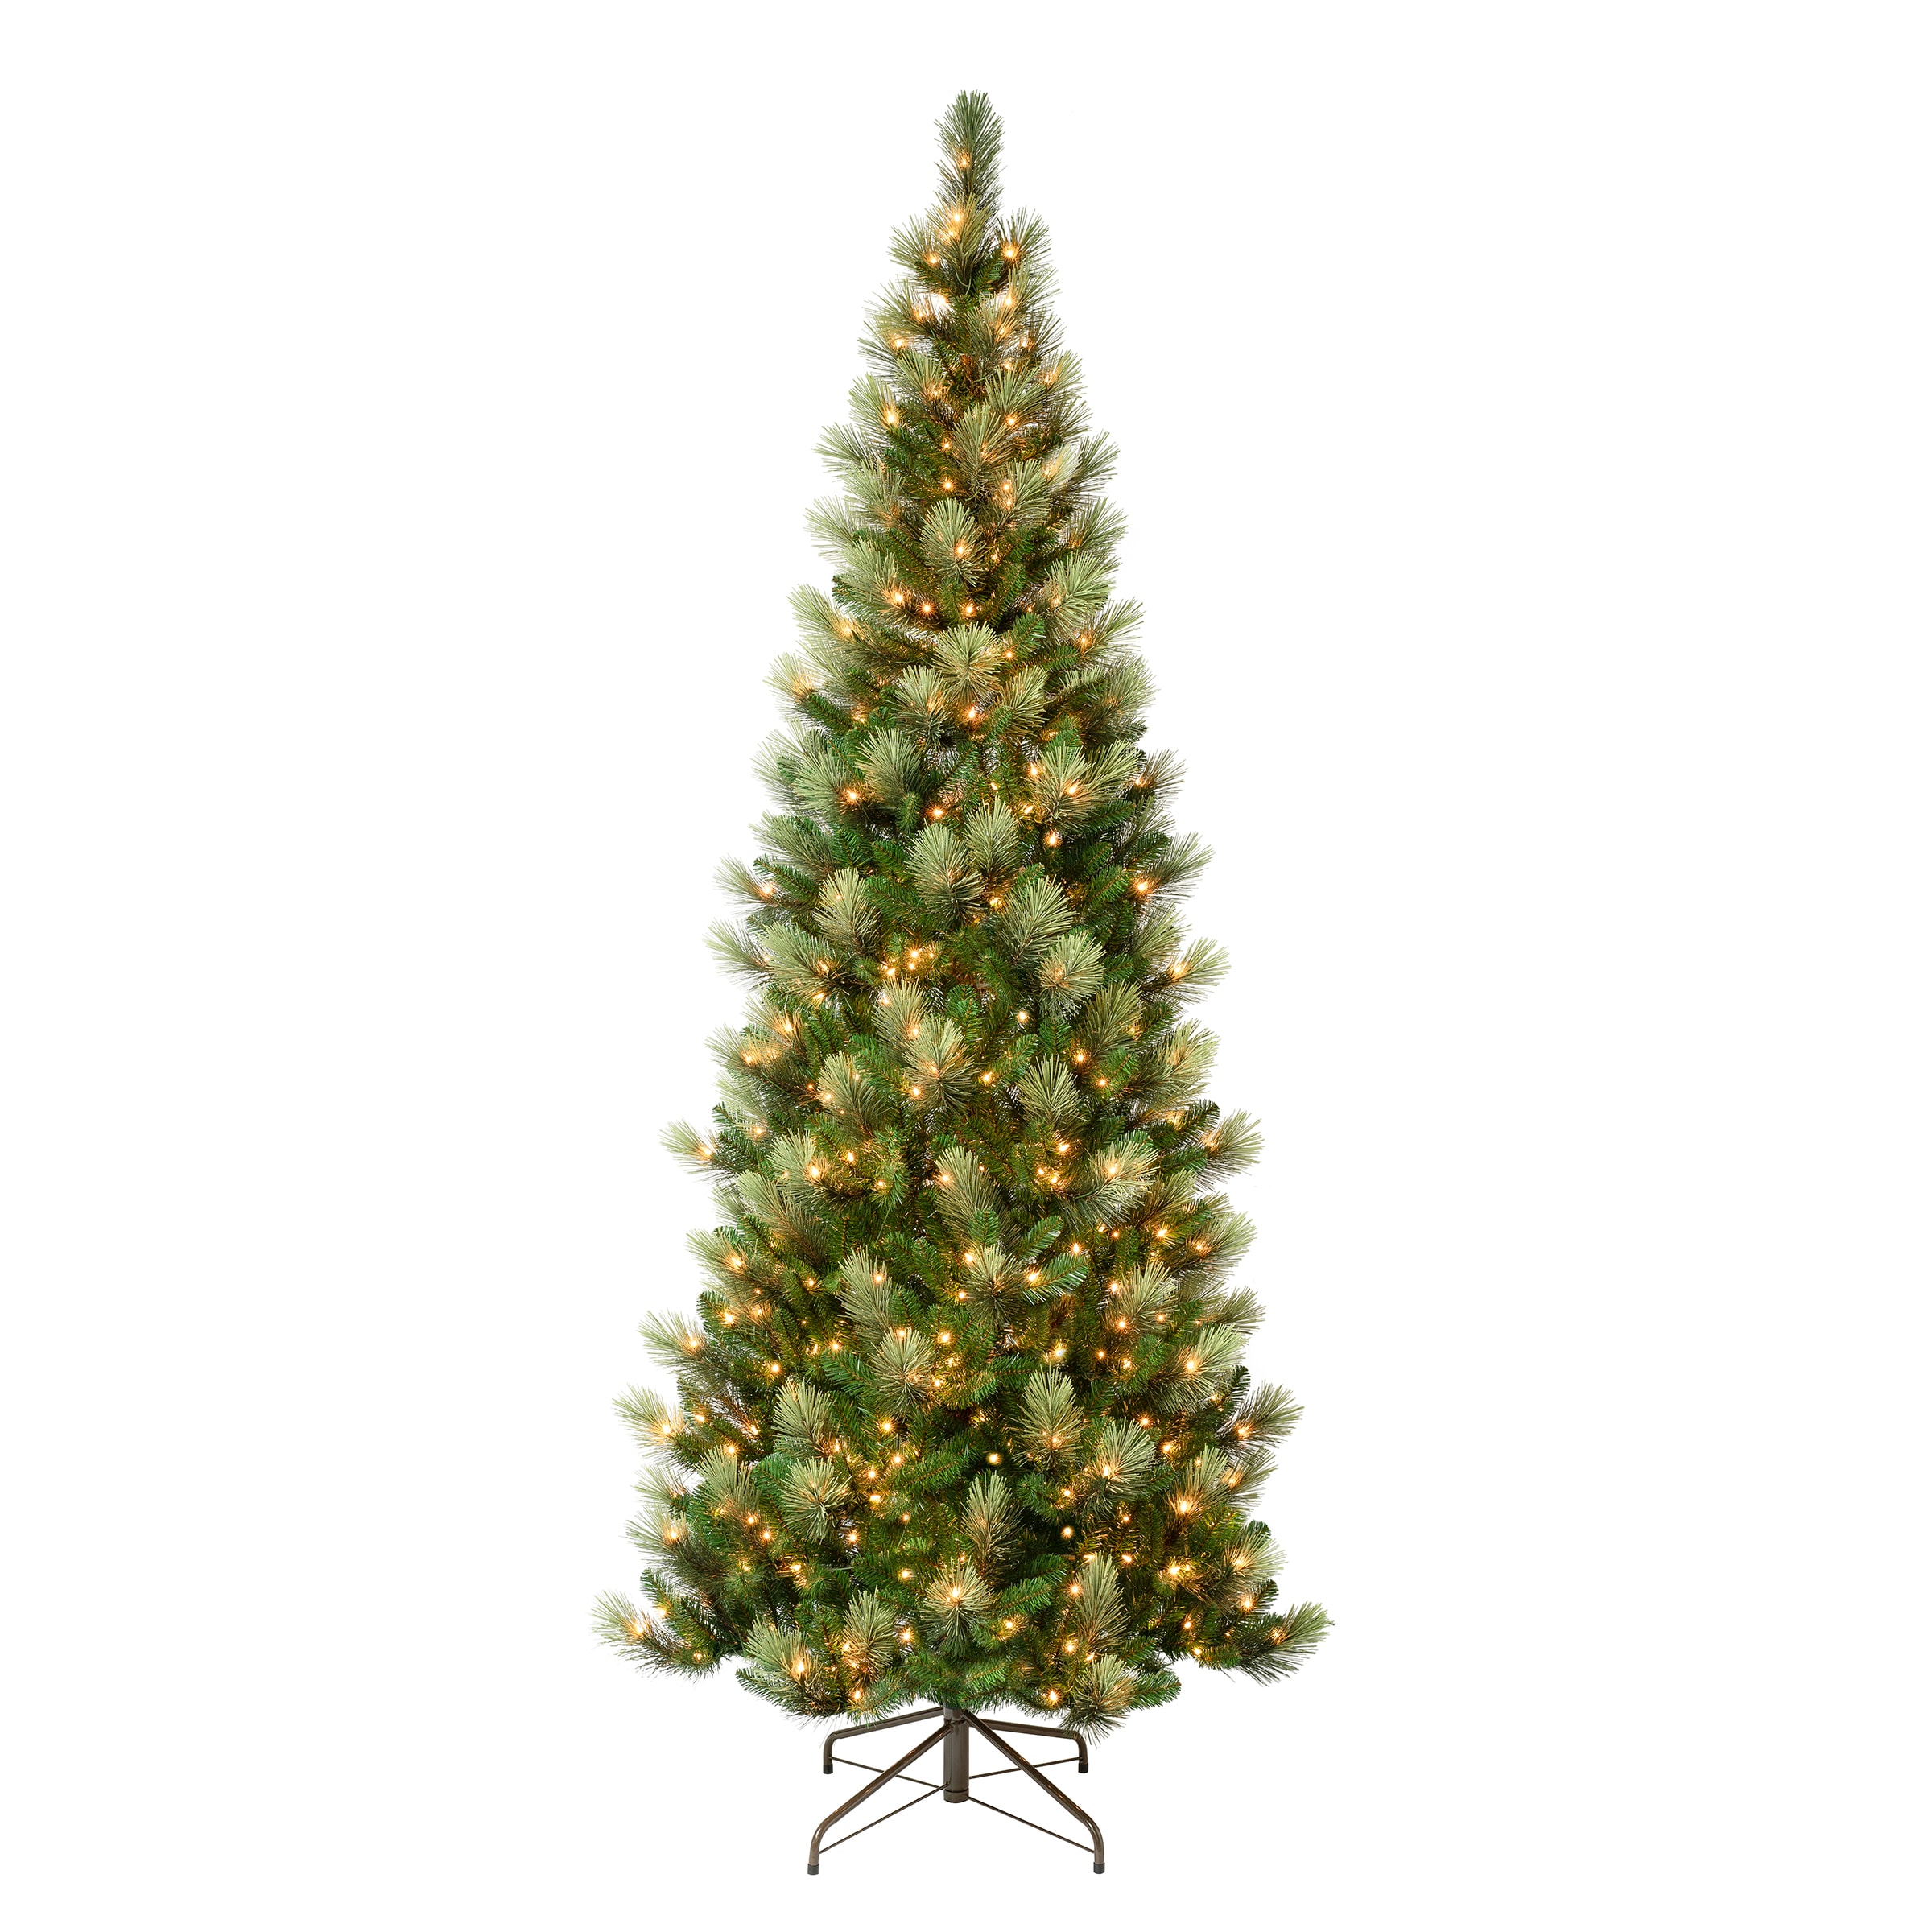 7 ft. Mountain Frasier Artificial Christmas Tree with 650 Clear LED Lights - 59 in. Wide